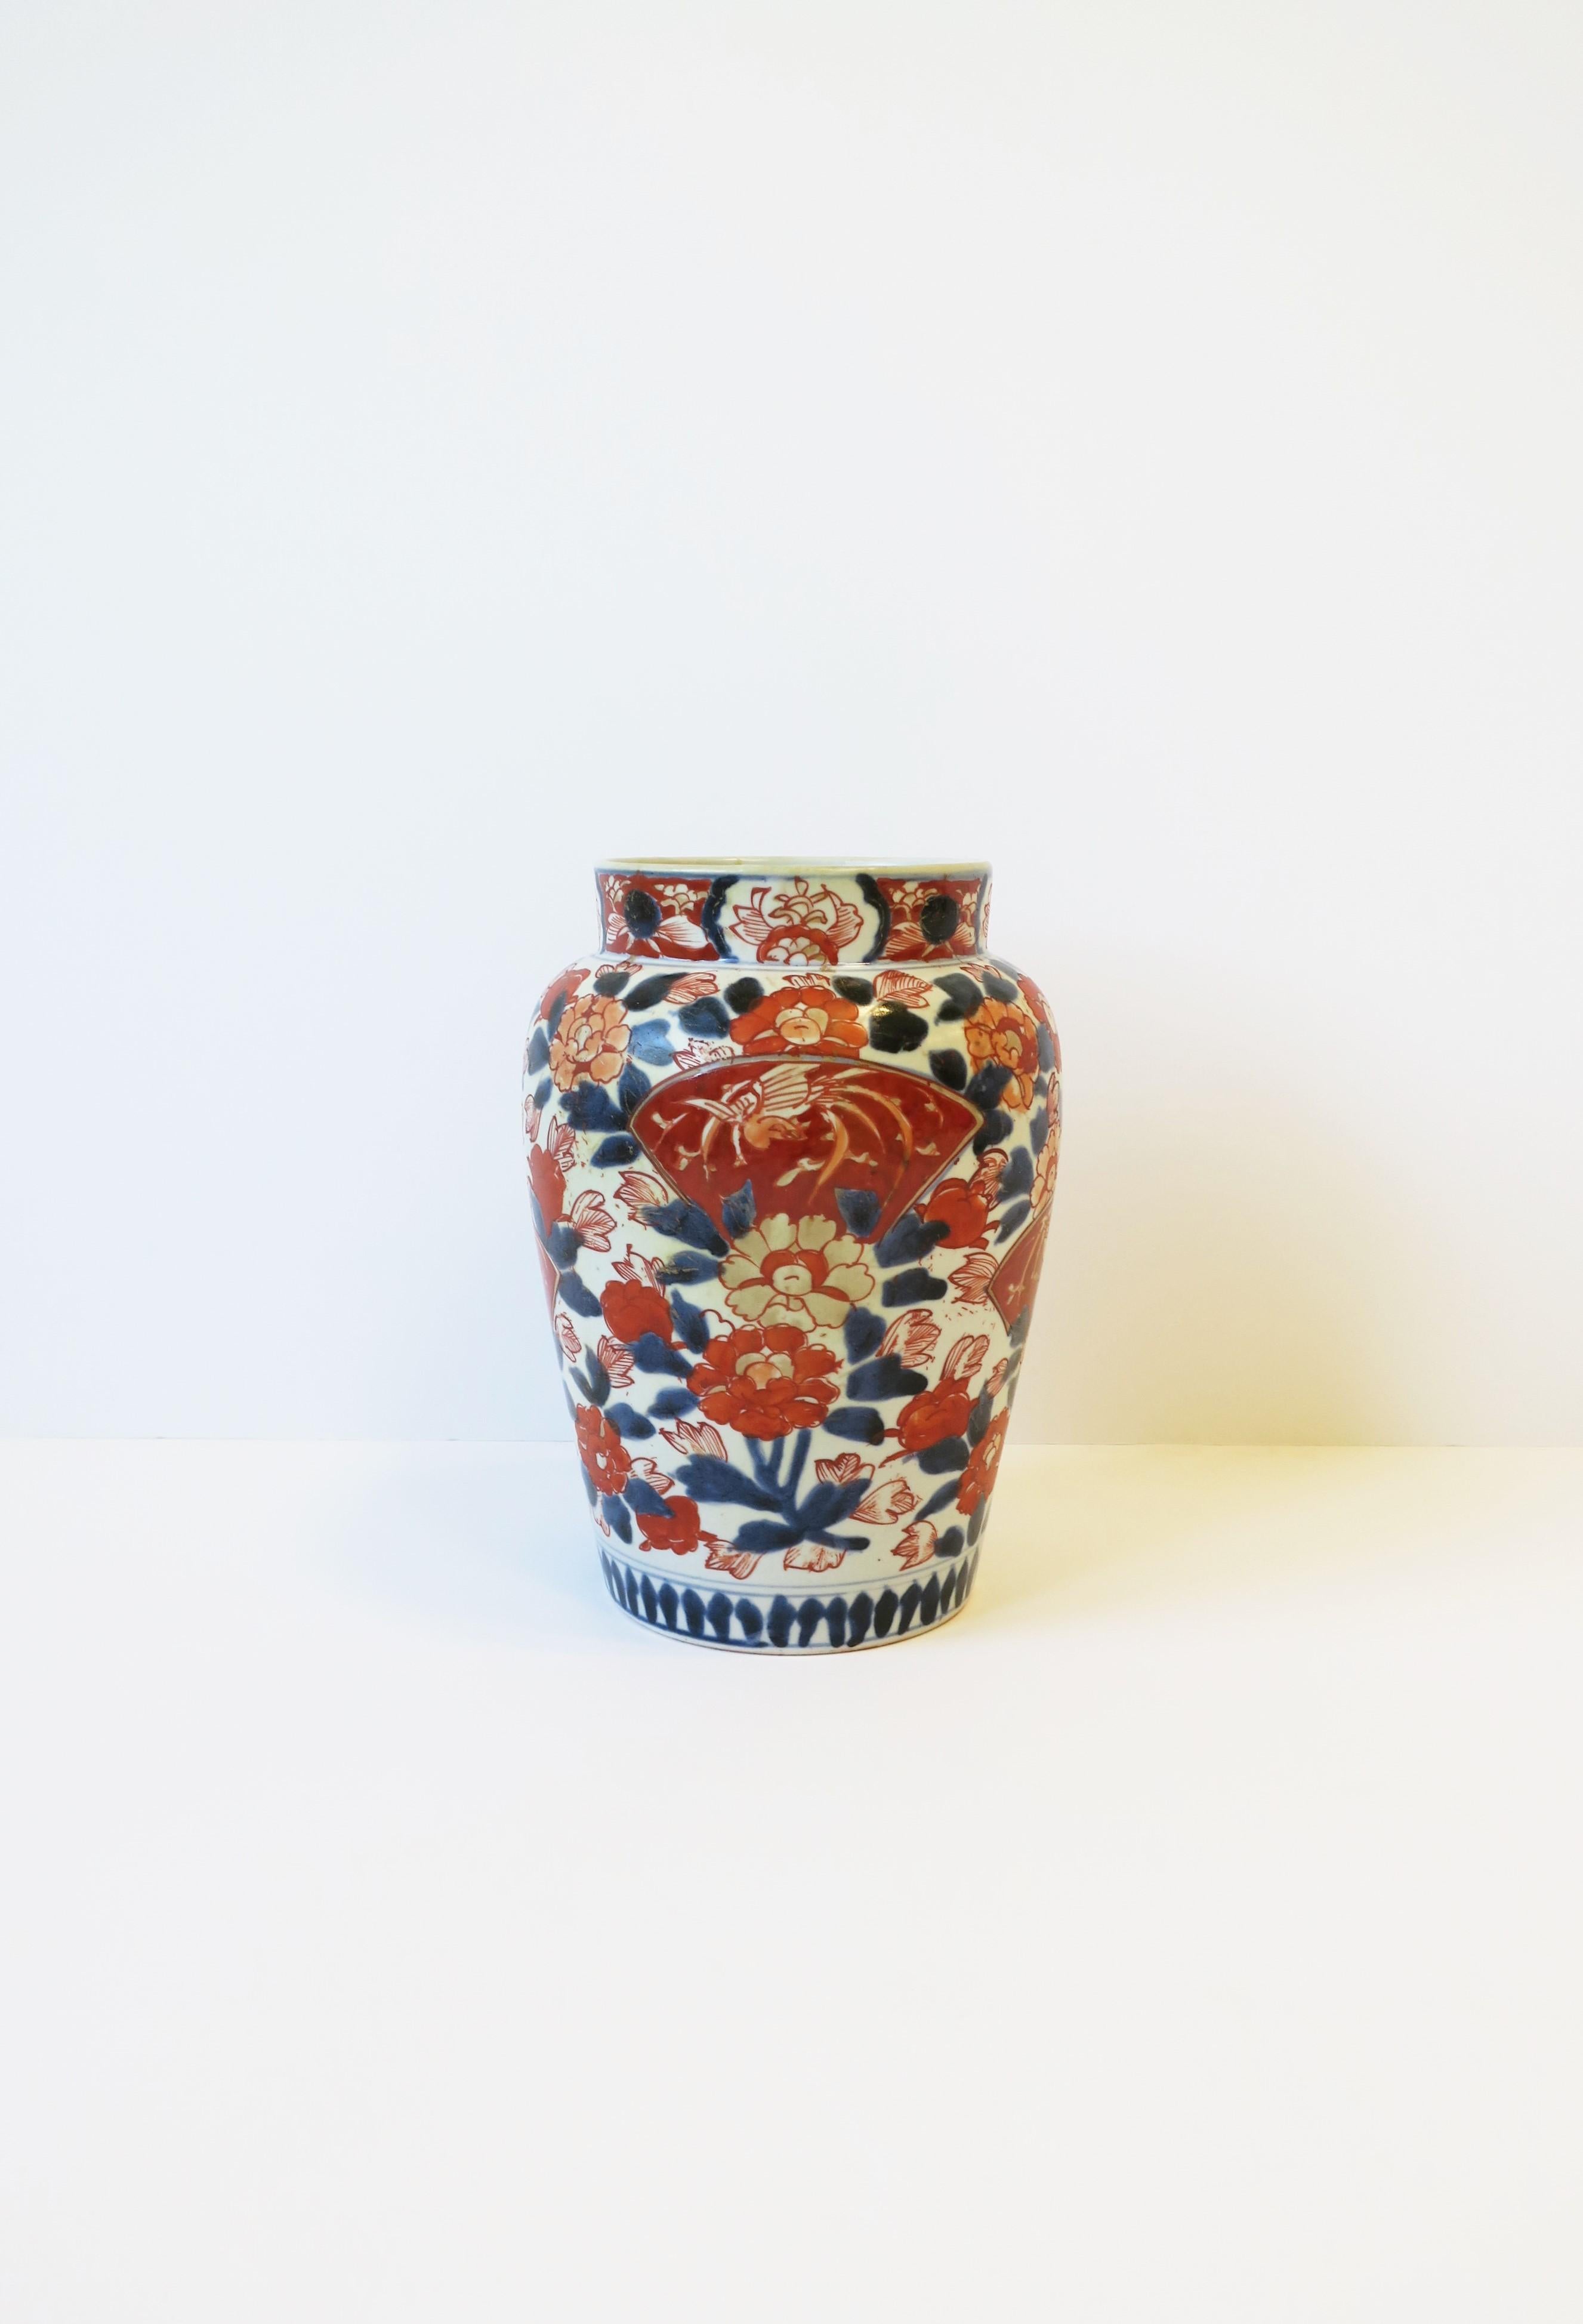 A beautiful Imari white porcelain Chinese Japanese vase with a beautiful hand painted blue and red flower design, circa 18th century or earlier. Dimensions: 5.5